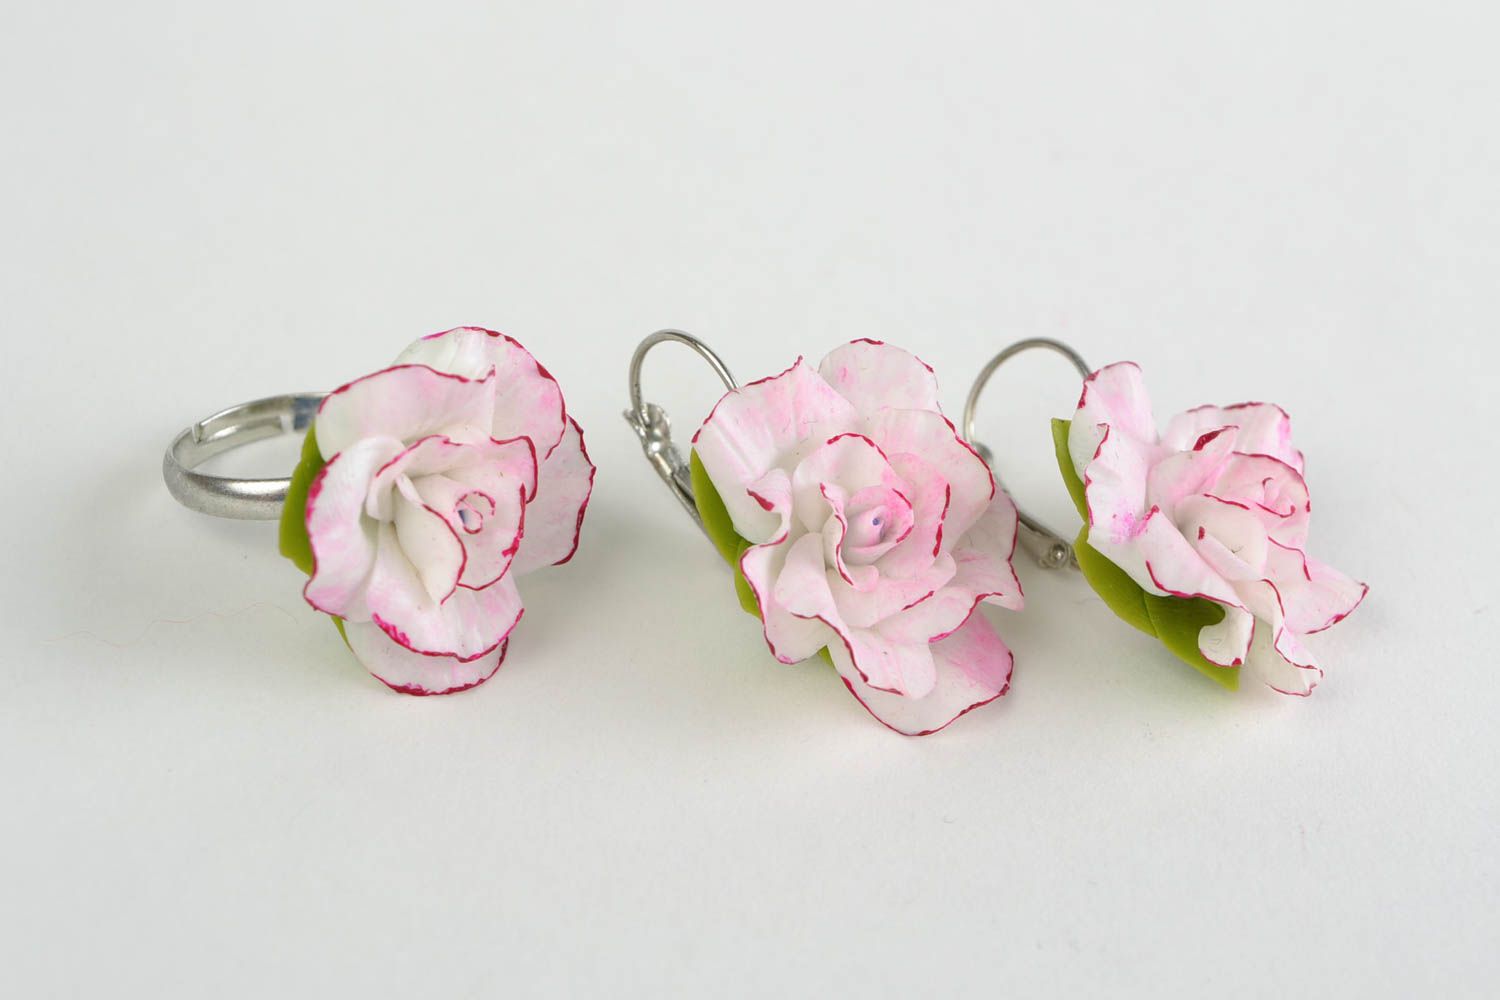 Gentle pink handmade cold porcelain flower jewelry set 2 items earrings and ring photo 2